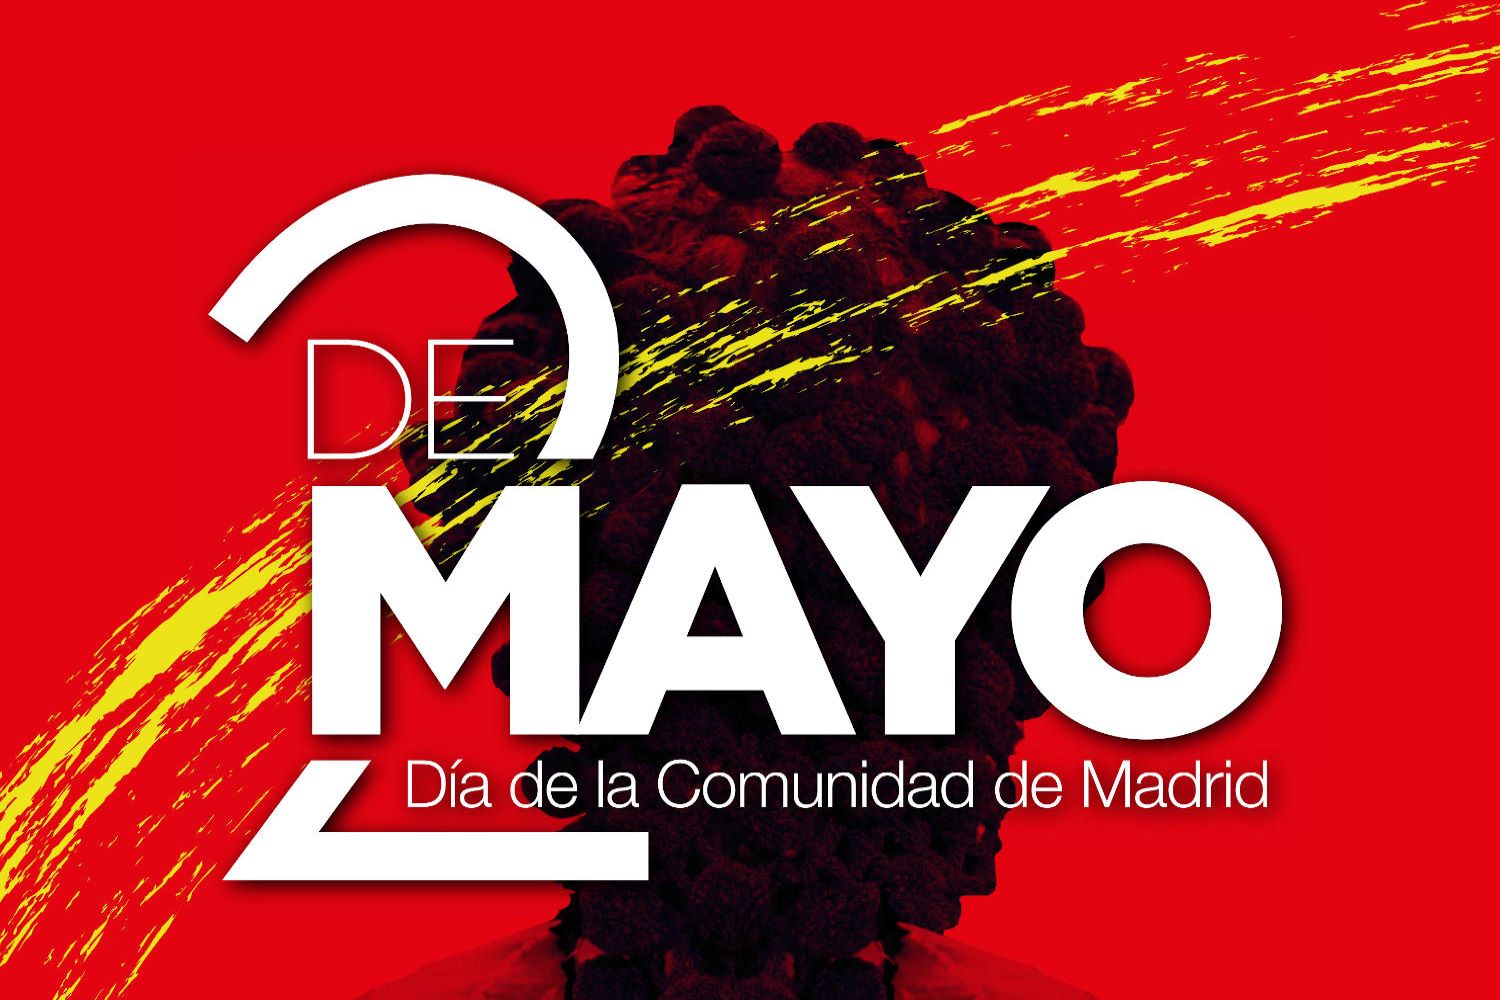 Celebrations of May 2nd in the Region of Madrid